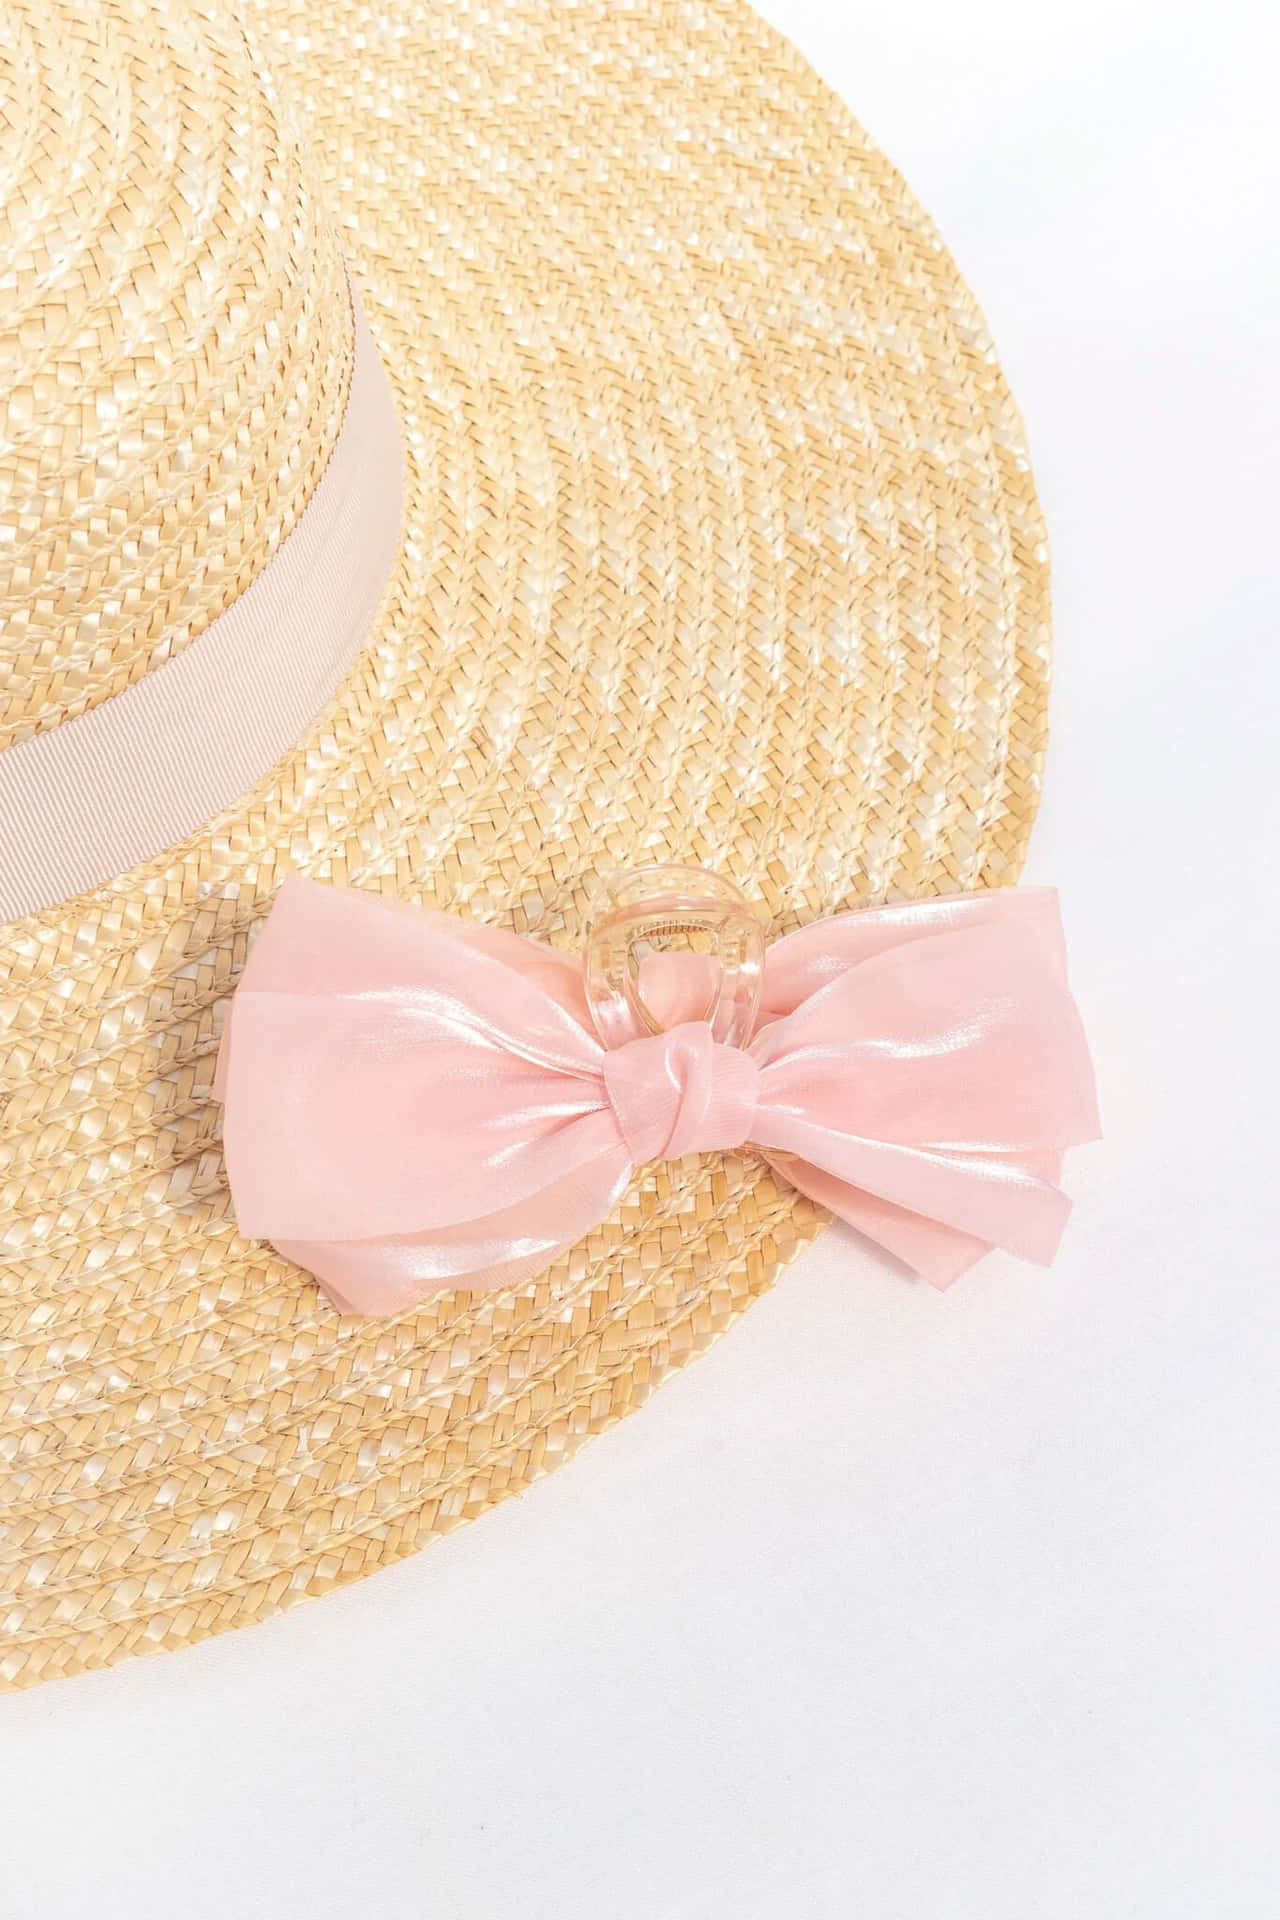 Straw Hatwith Pink Bow Aesthetic Wallpaper